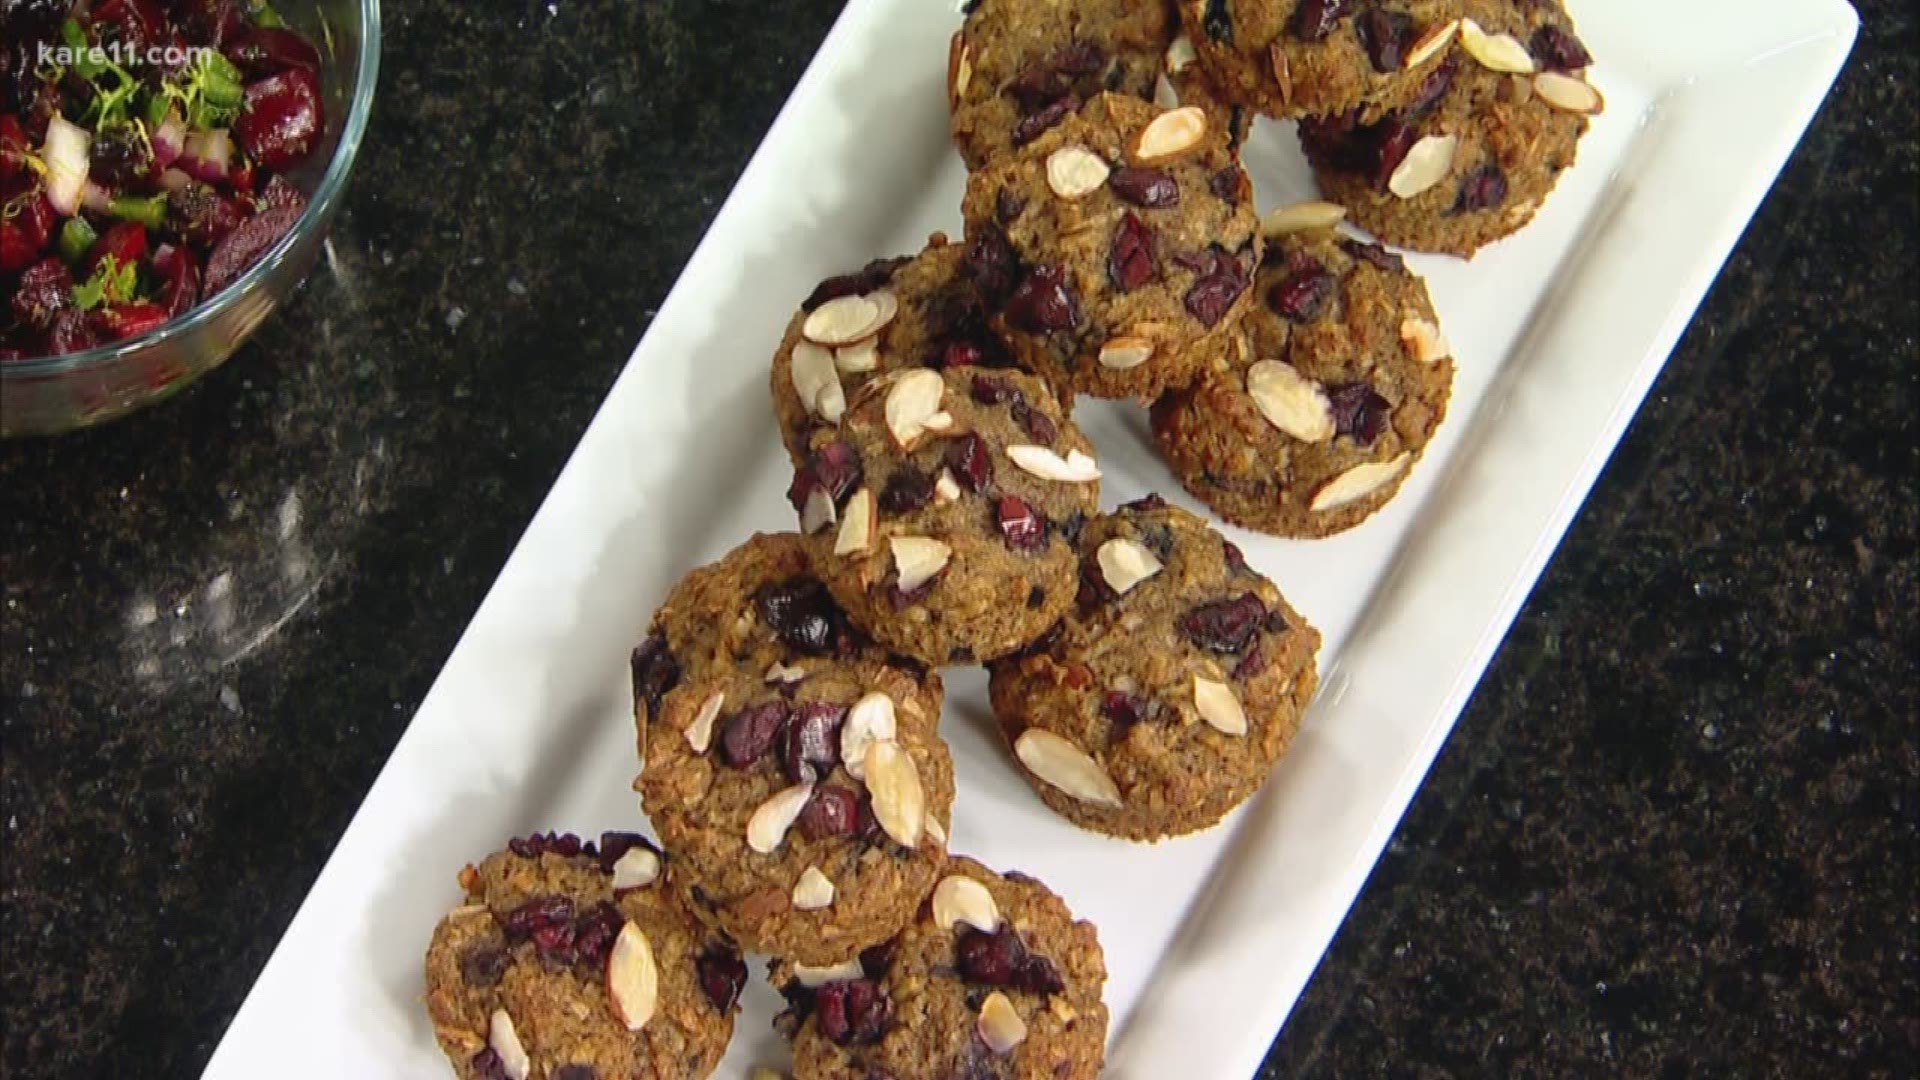 Late summer is a great time to focus on cherries, and all the awesome stuff you can make with them. Hyvee dietician Melissa Jaeger stopped by KARE 11 Saturday with some awesome ideas.